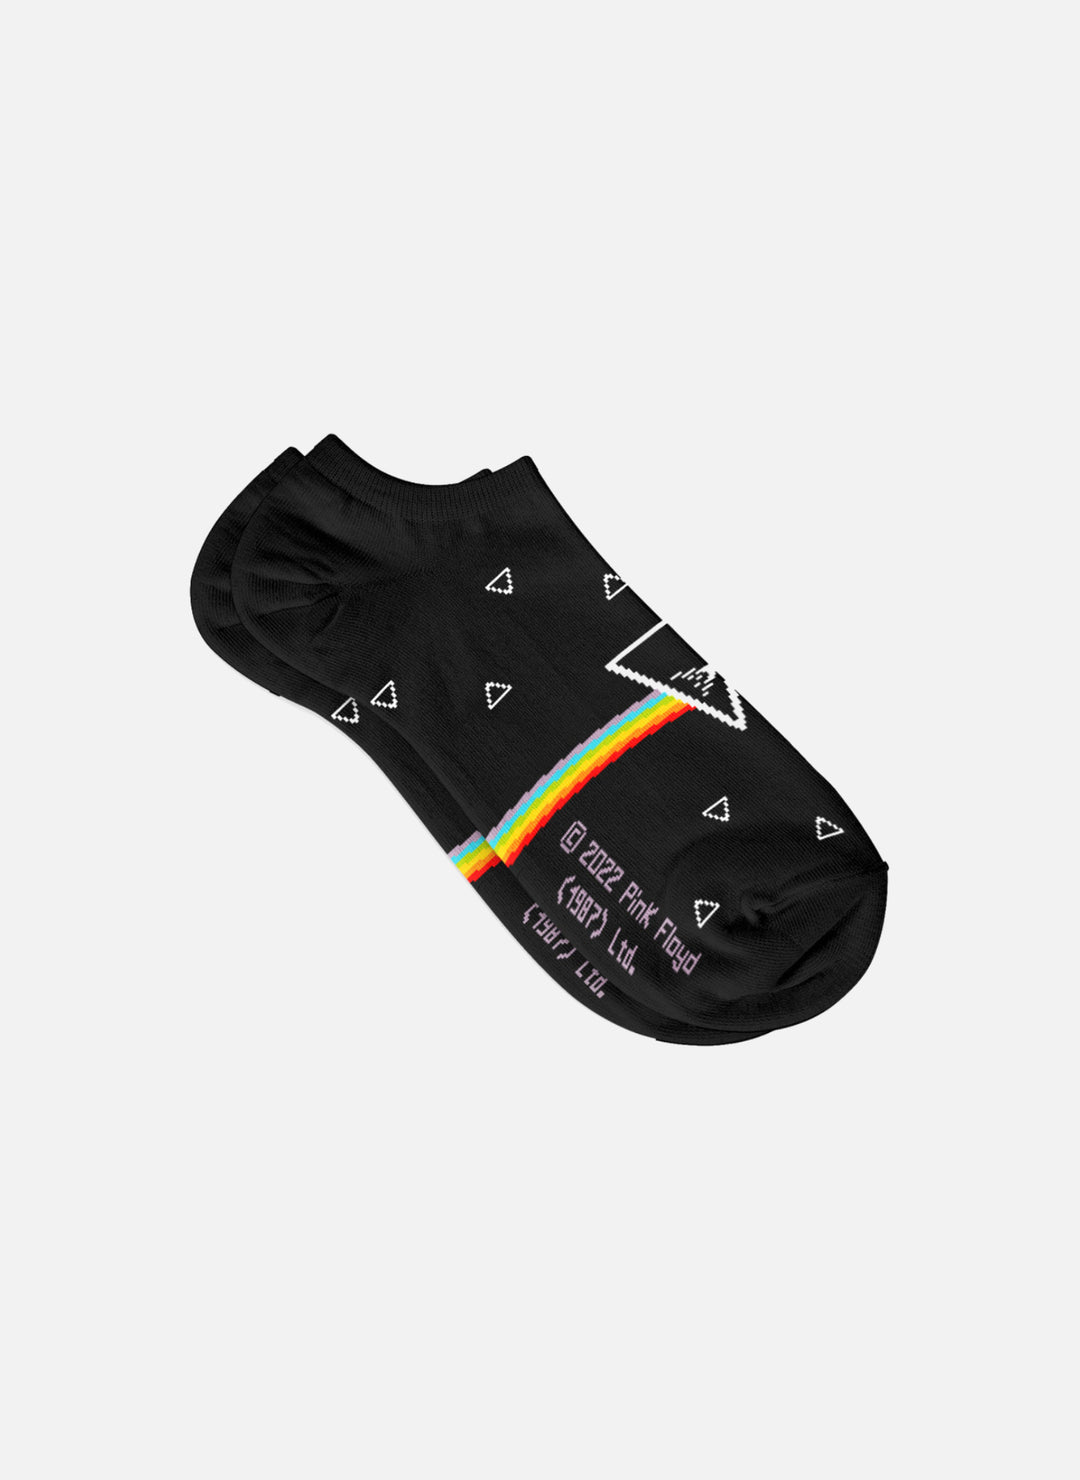 Socquettes Dark Side of the Moon, Pink Floyd